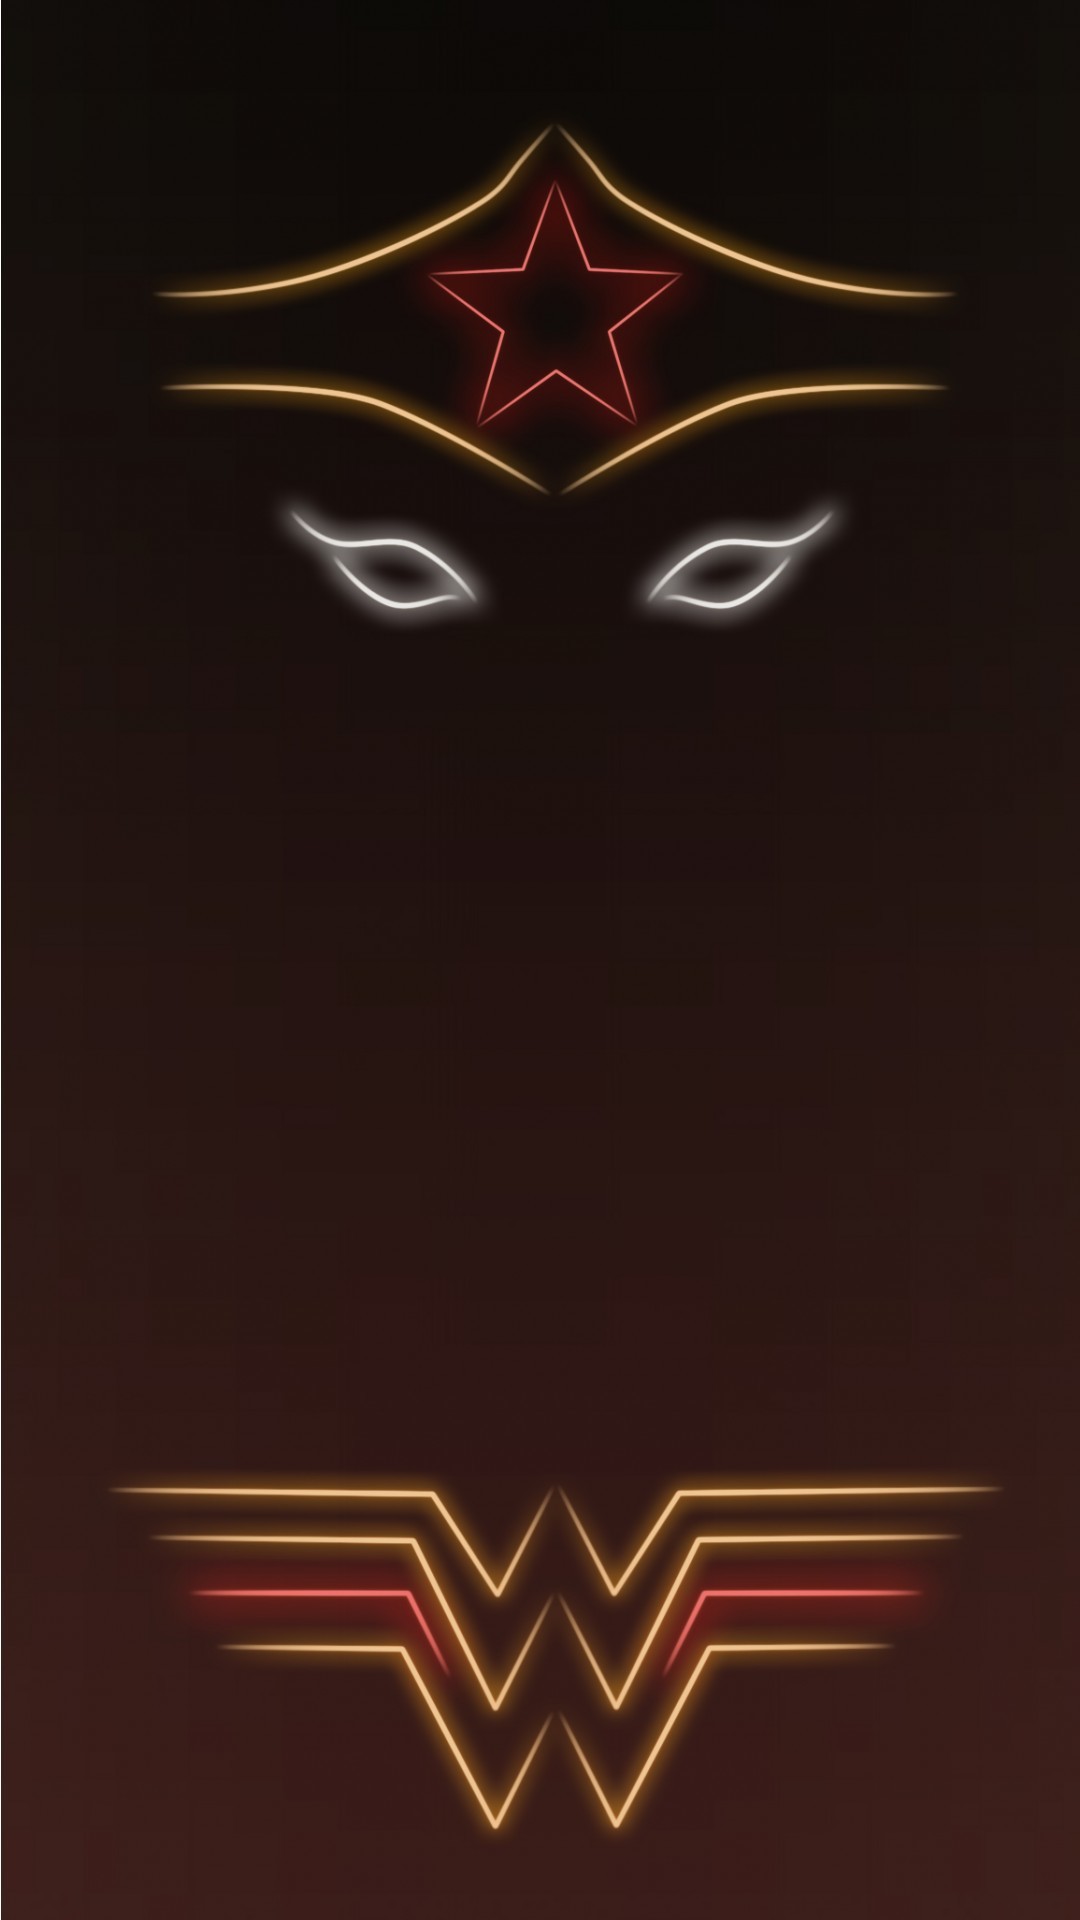 1080x1920 Wonder woman. Tap to see more Superheroes Glow With Neon Light Apple iPhone  6s Plus